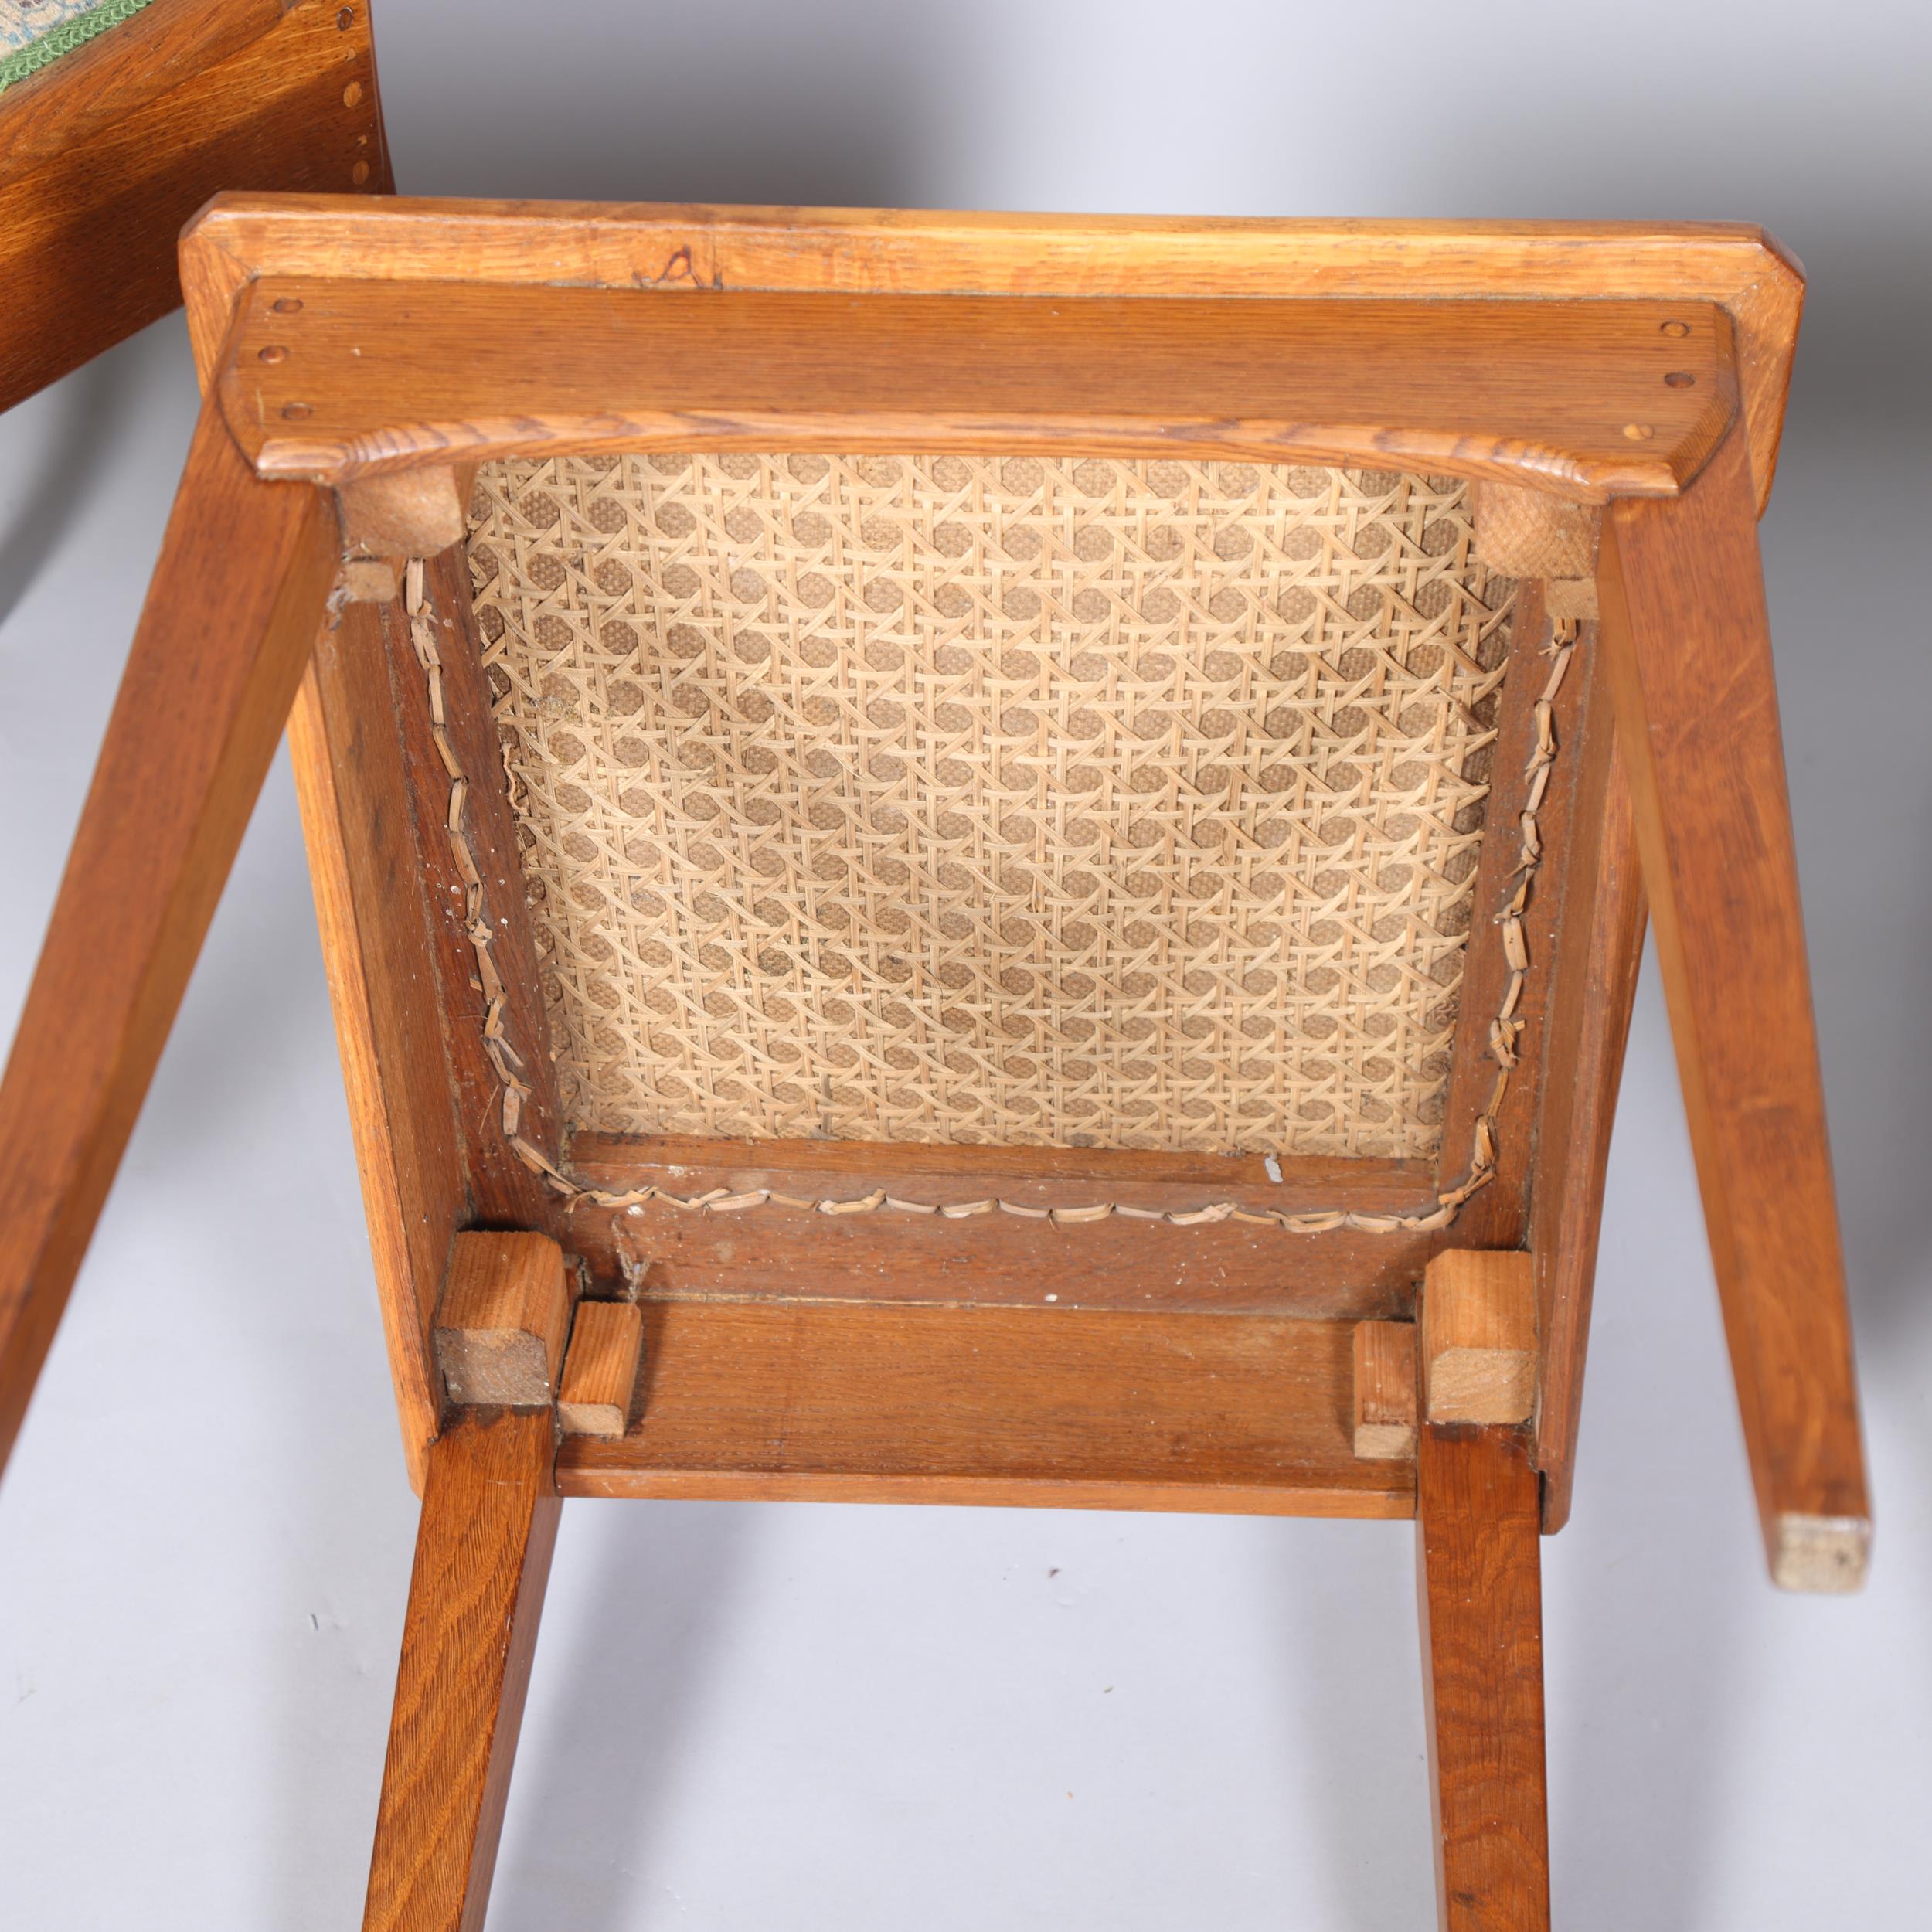 RICHARD RIEMERSCHMID (1868 - 1957), a set of 4 Arts and Crafts or Jugendstil chairs made by - Image 10 of 11